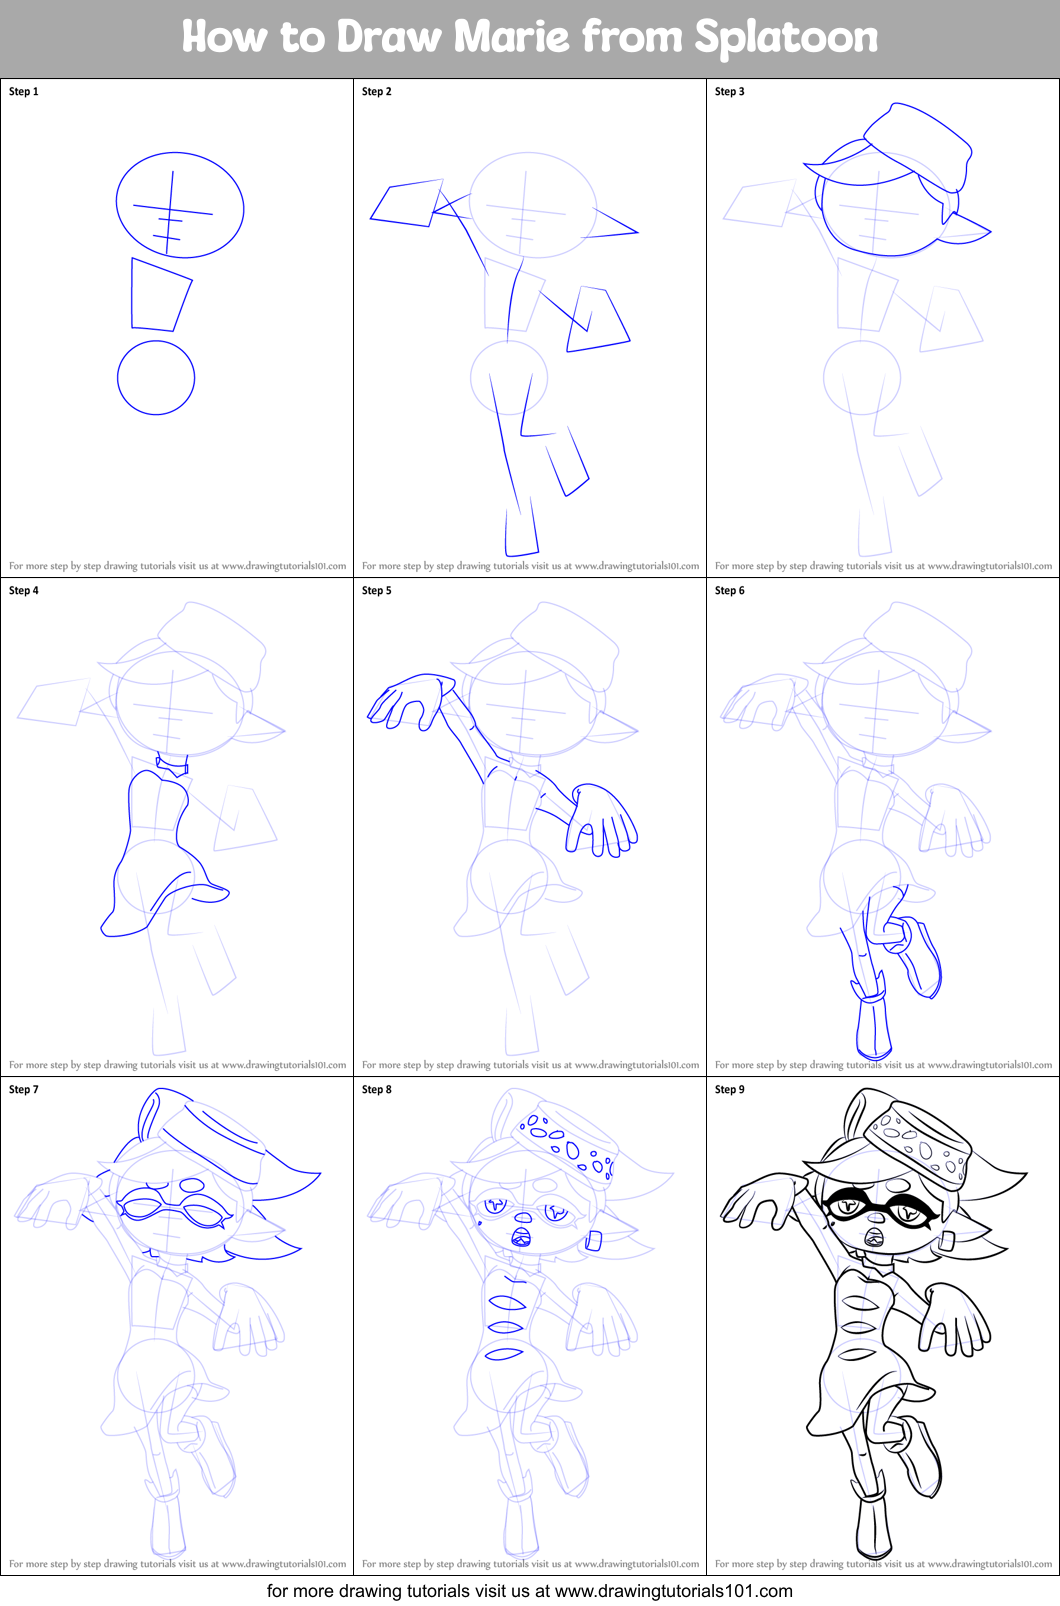 How to Draw Marie from Splatoon (Splatoon) Step by Step